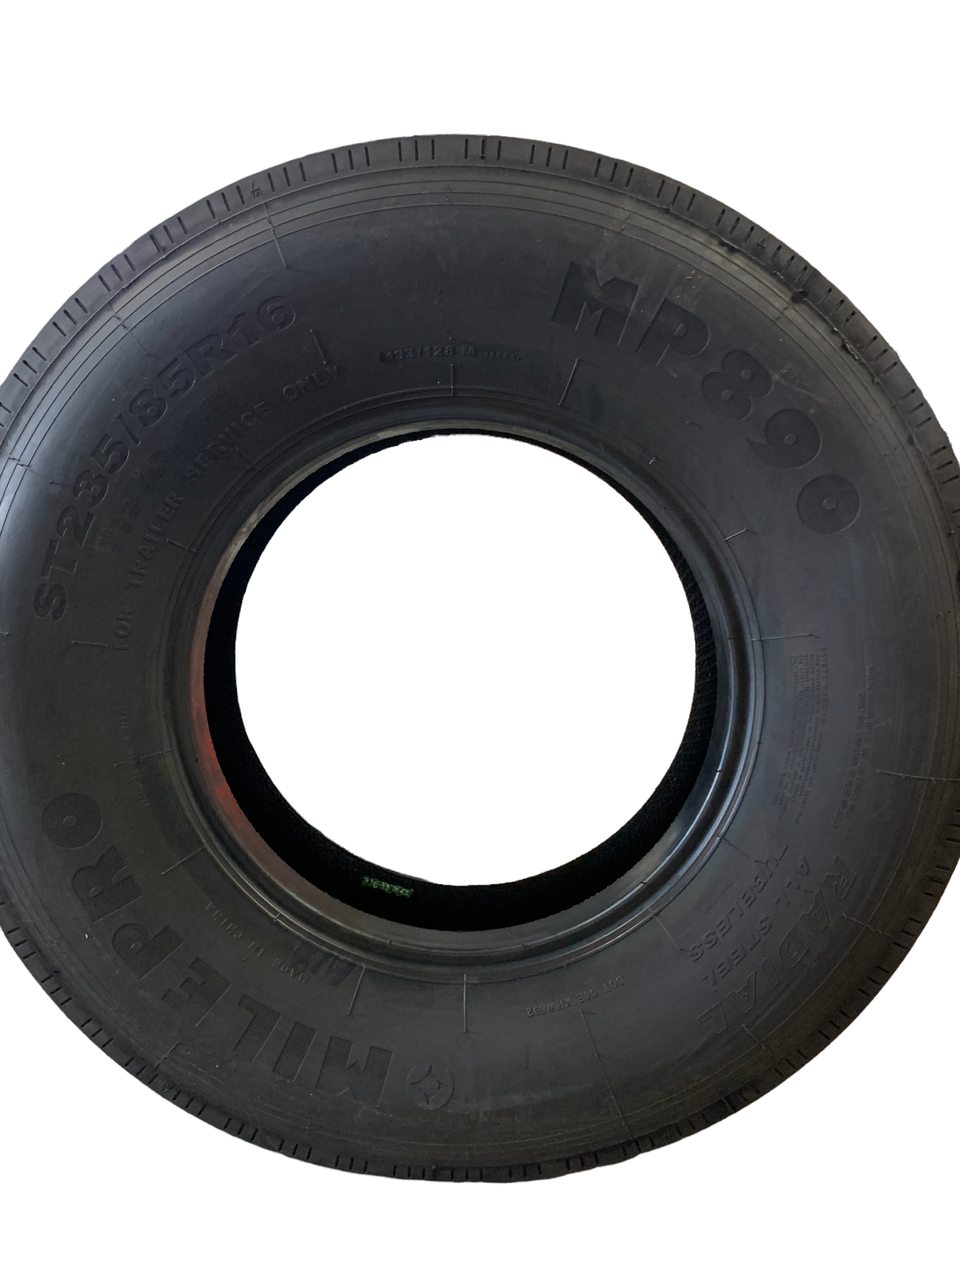 Trailer Tire ST235/85R16 Load Range F rated to 3960 lbs by L